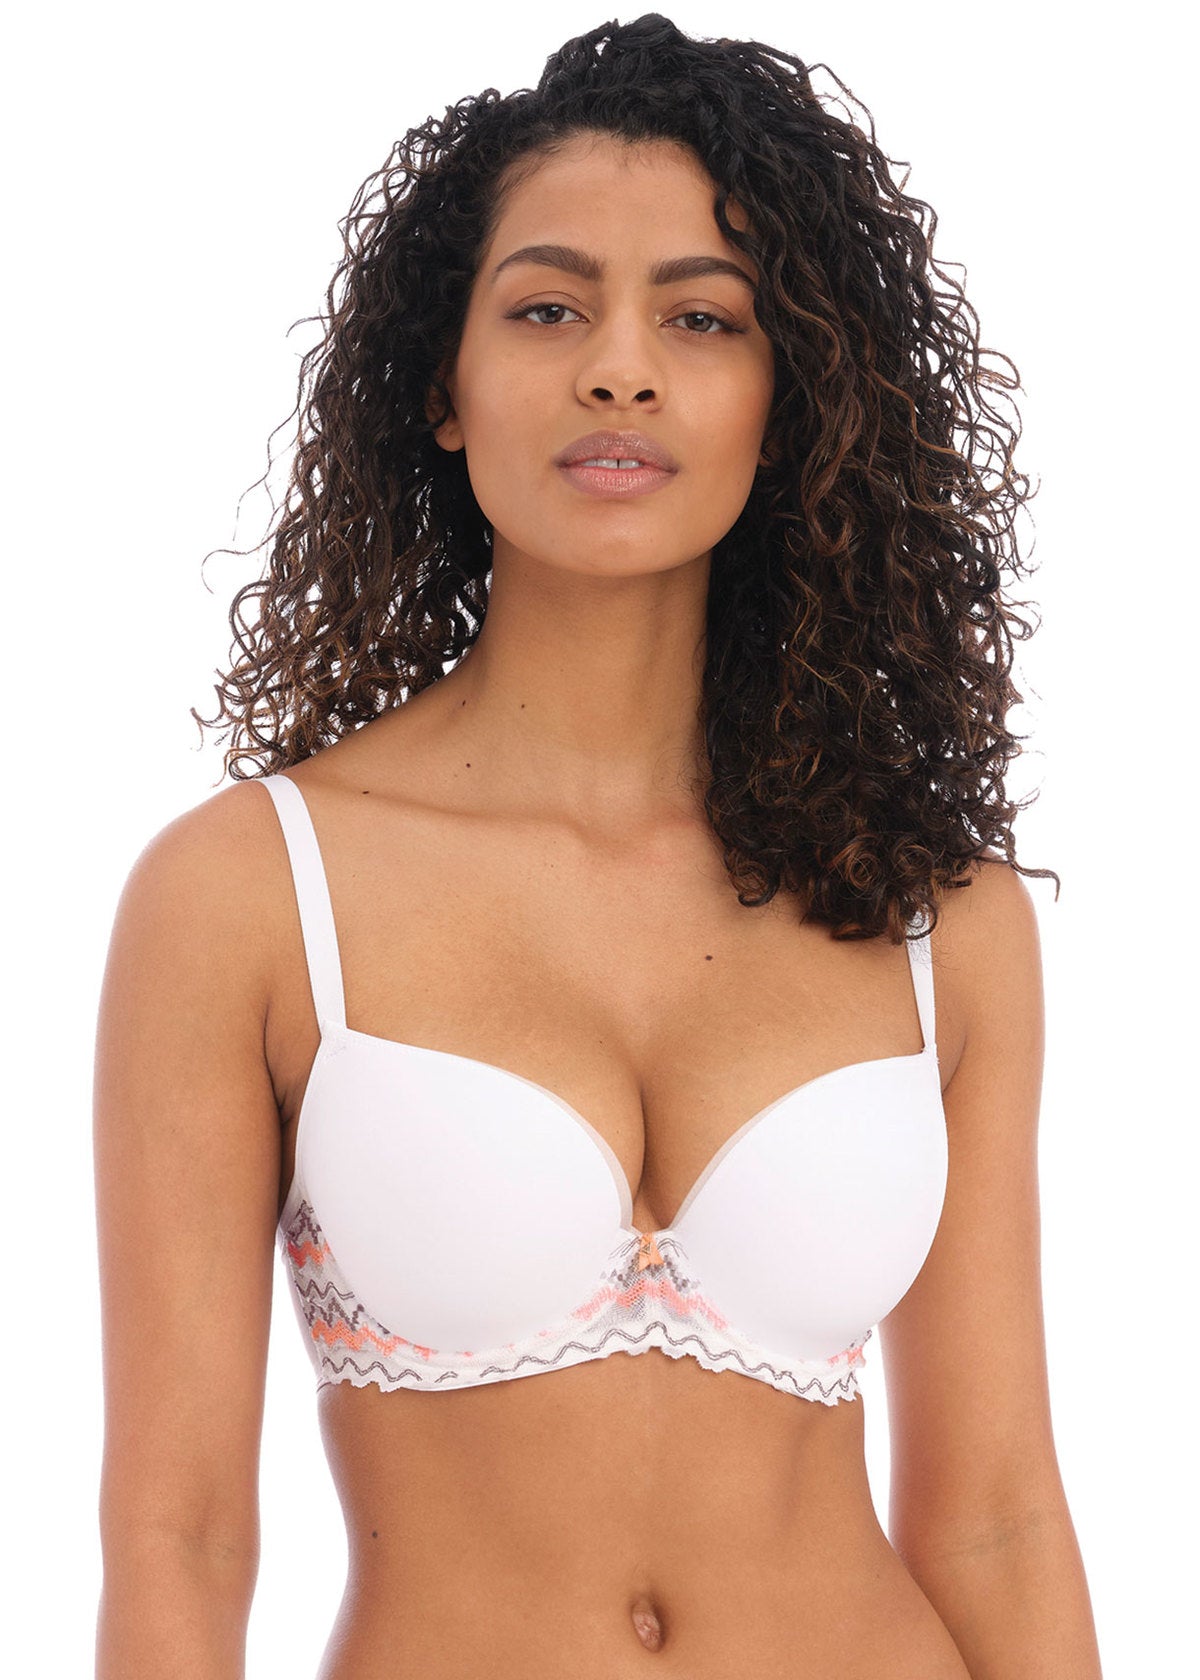 Linga life Women's Padded Underwired T-Shirt Bra with Transparent